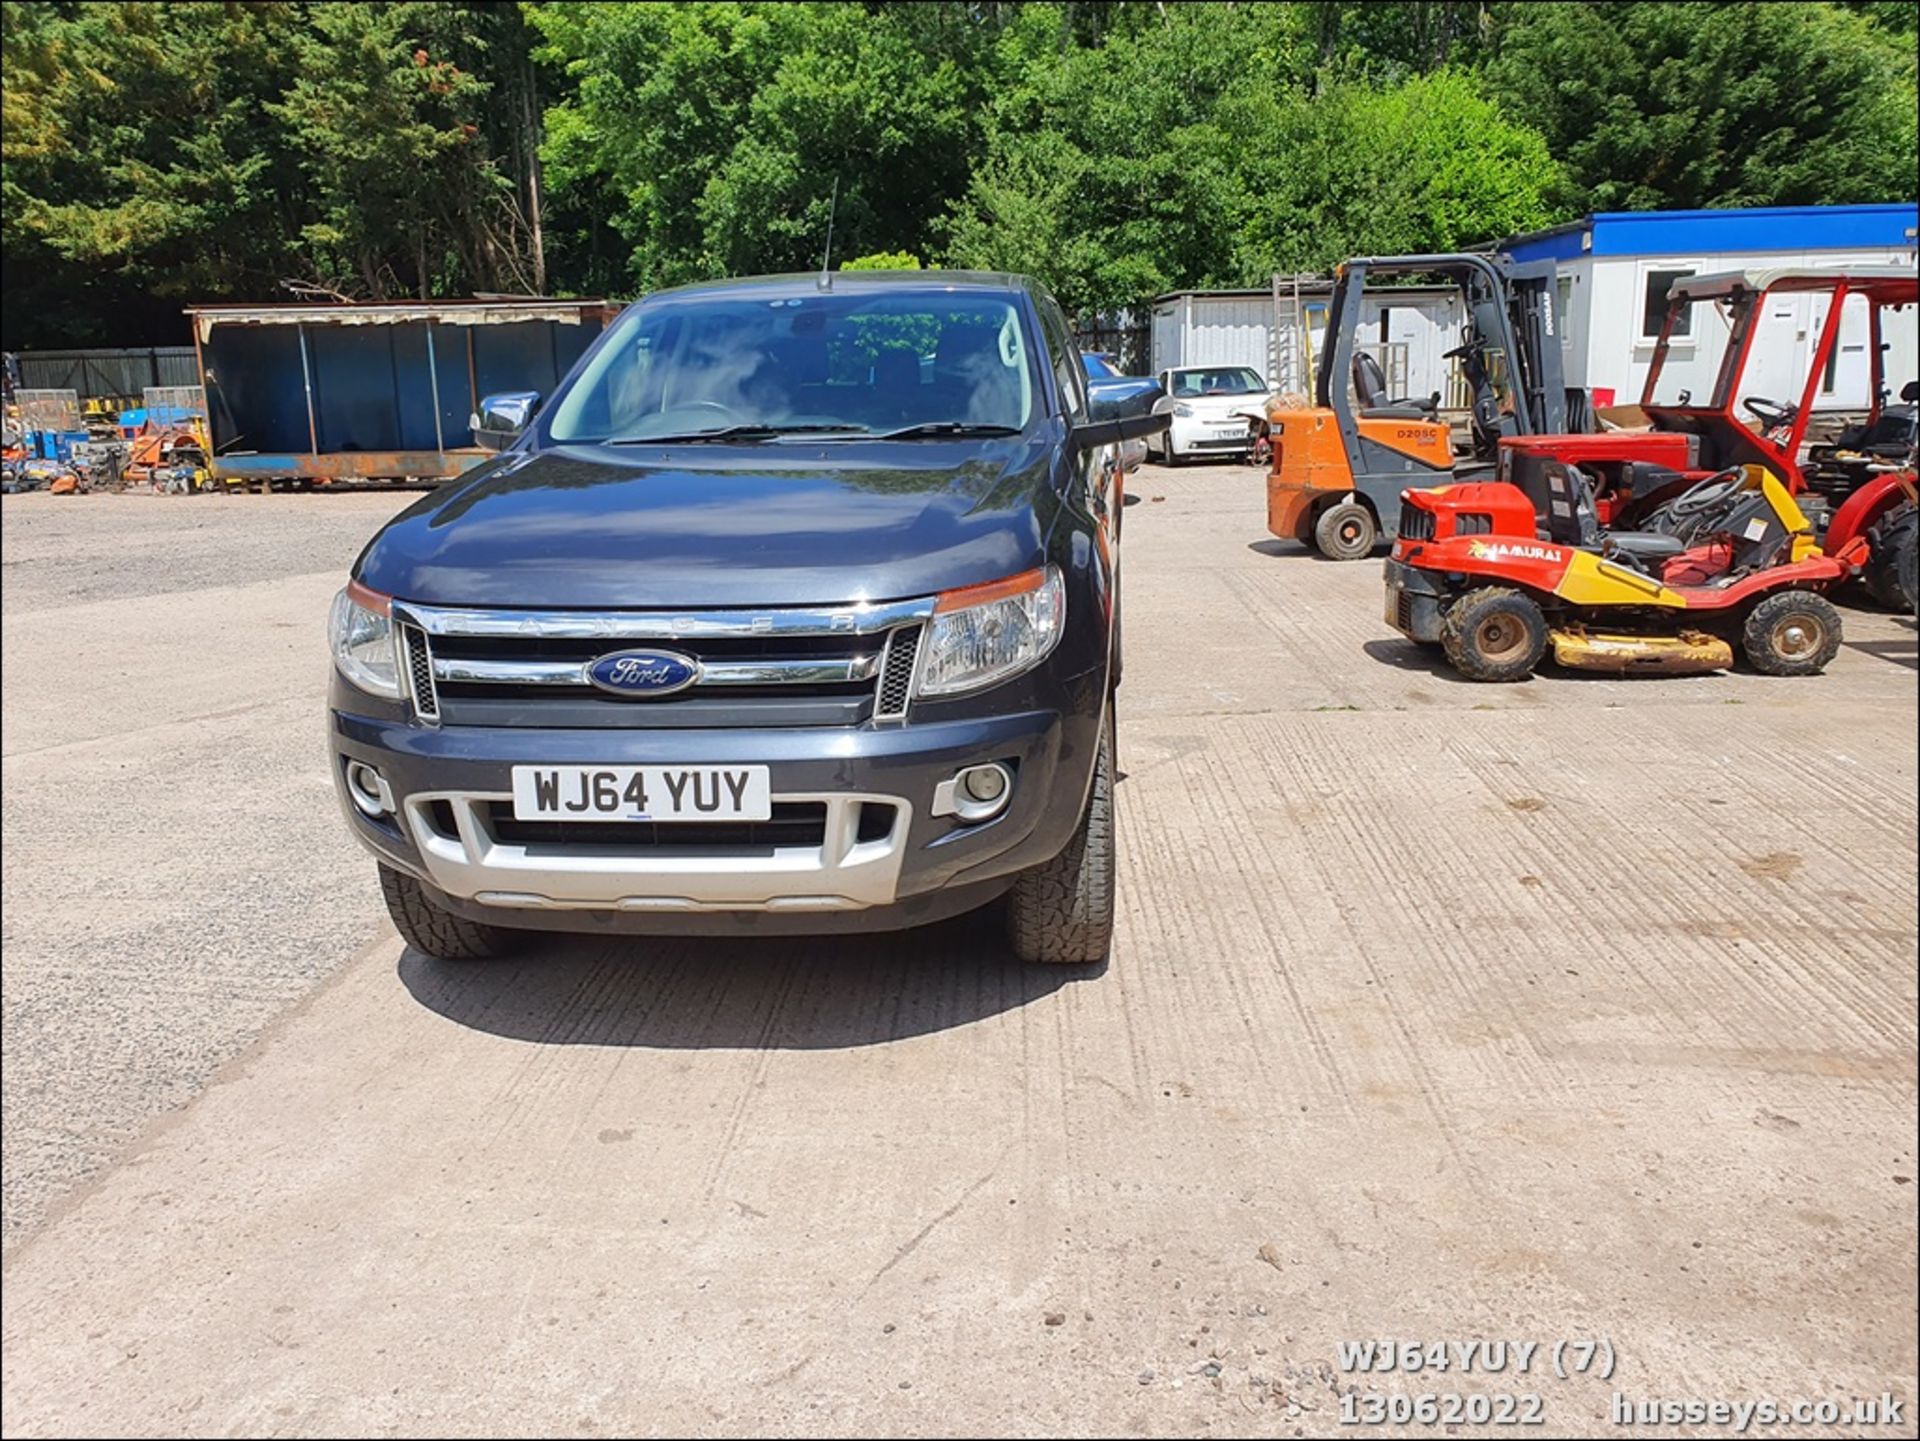 14/64 FORD RANGER LIMITED 4X4 TDCI - 2198cc 4dr 4x4 (Grey, 106k) - Image 7 of 43